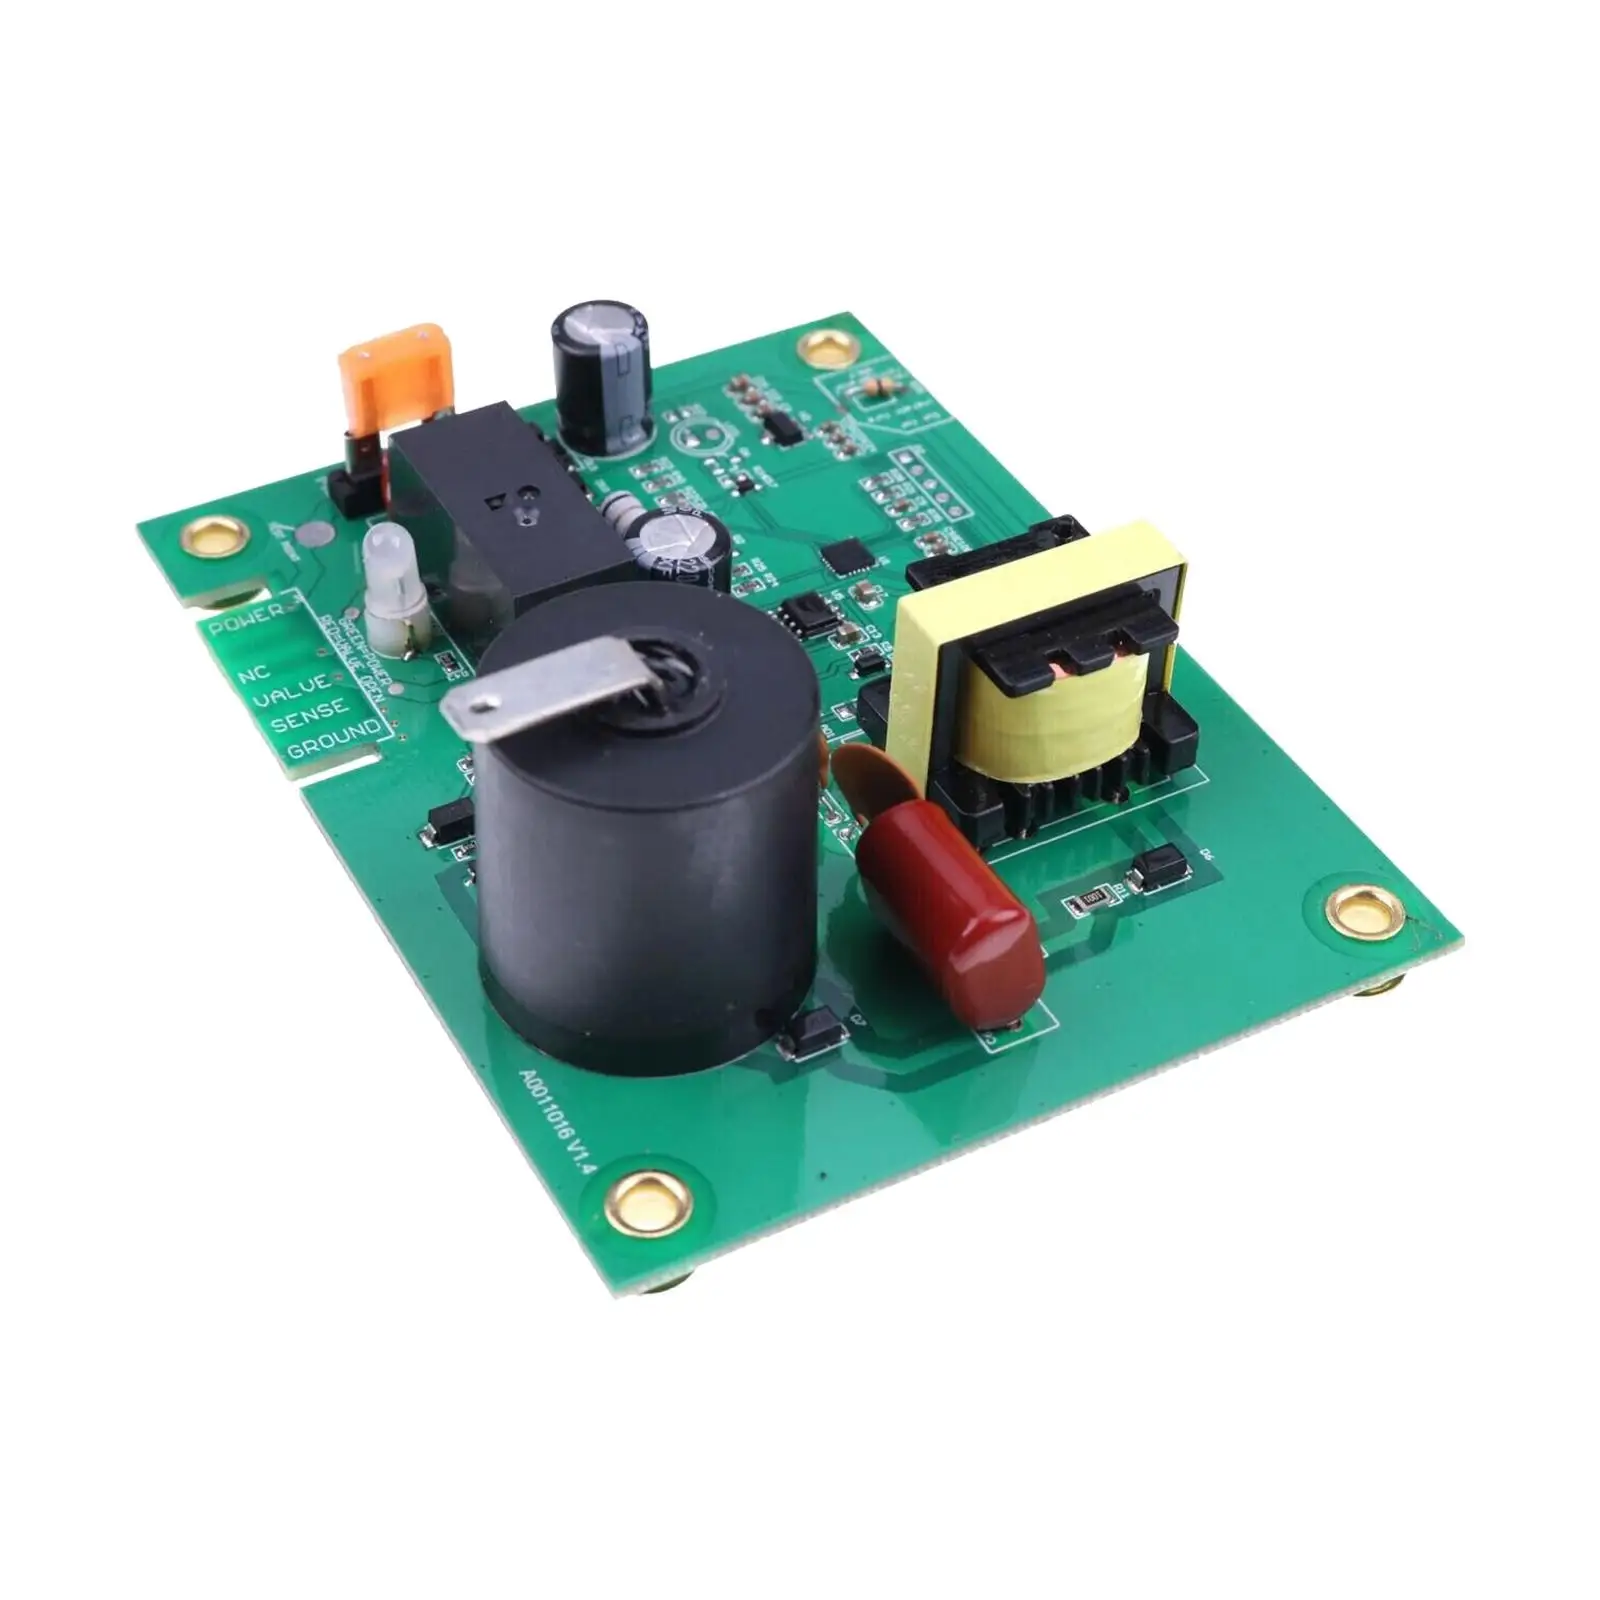 Ignition Control Circuit Board Uib S Dual Sense External Sense Connector 12V Replacement Module Board Easily to Install Sturdy